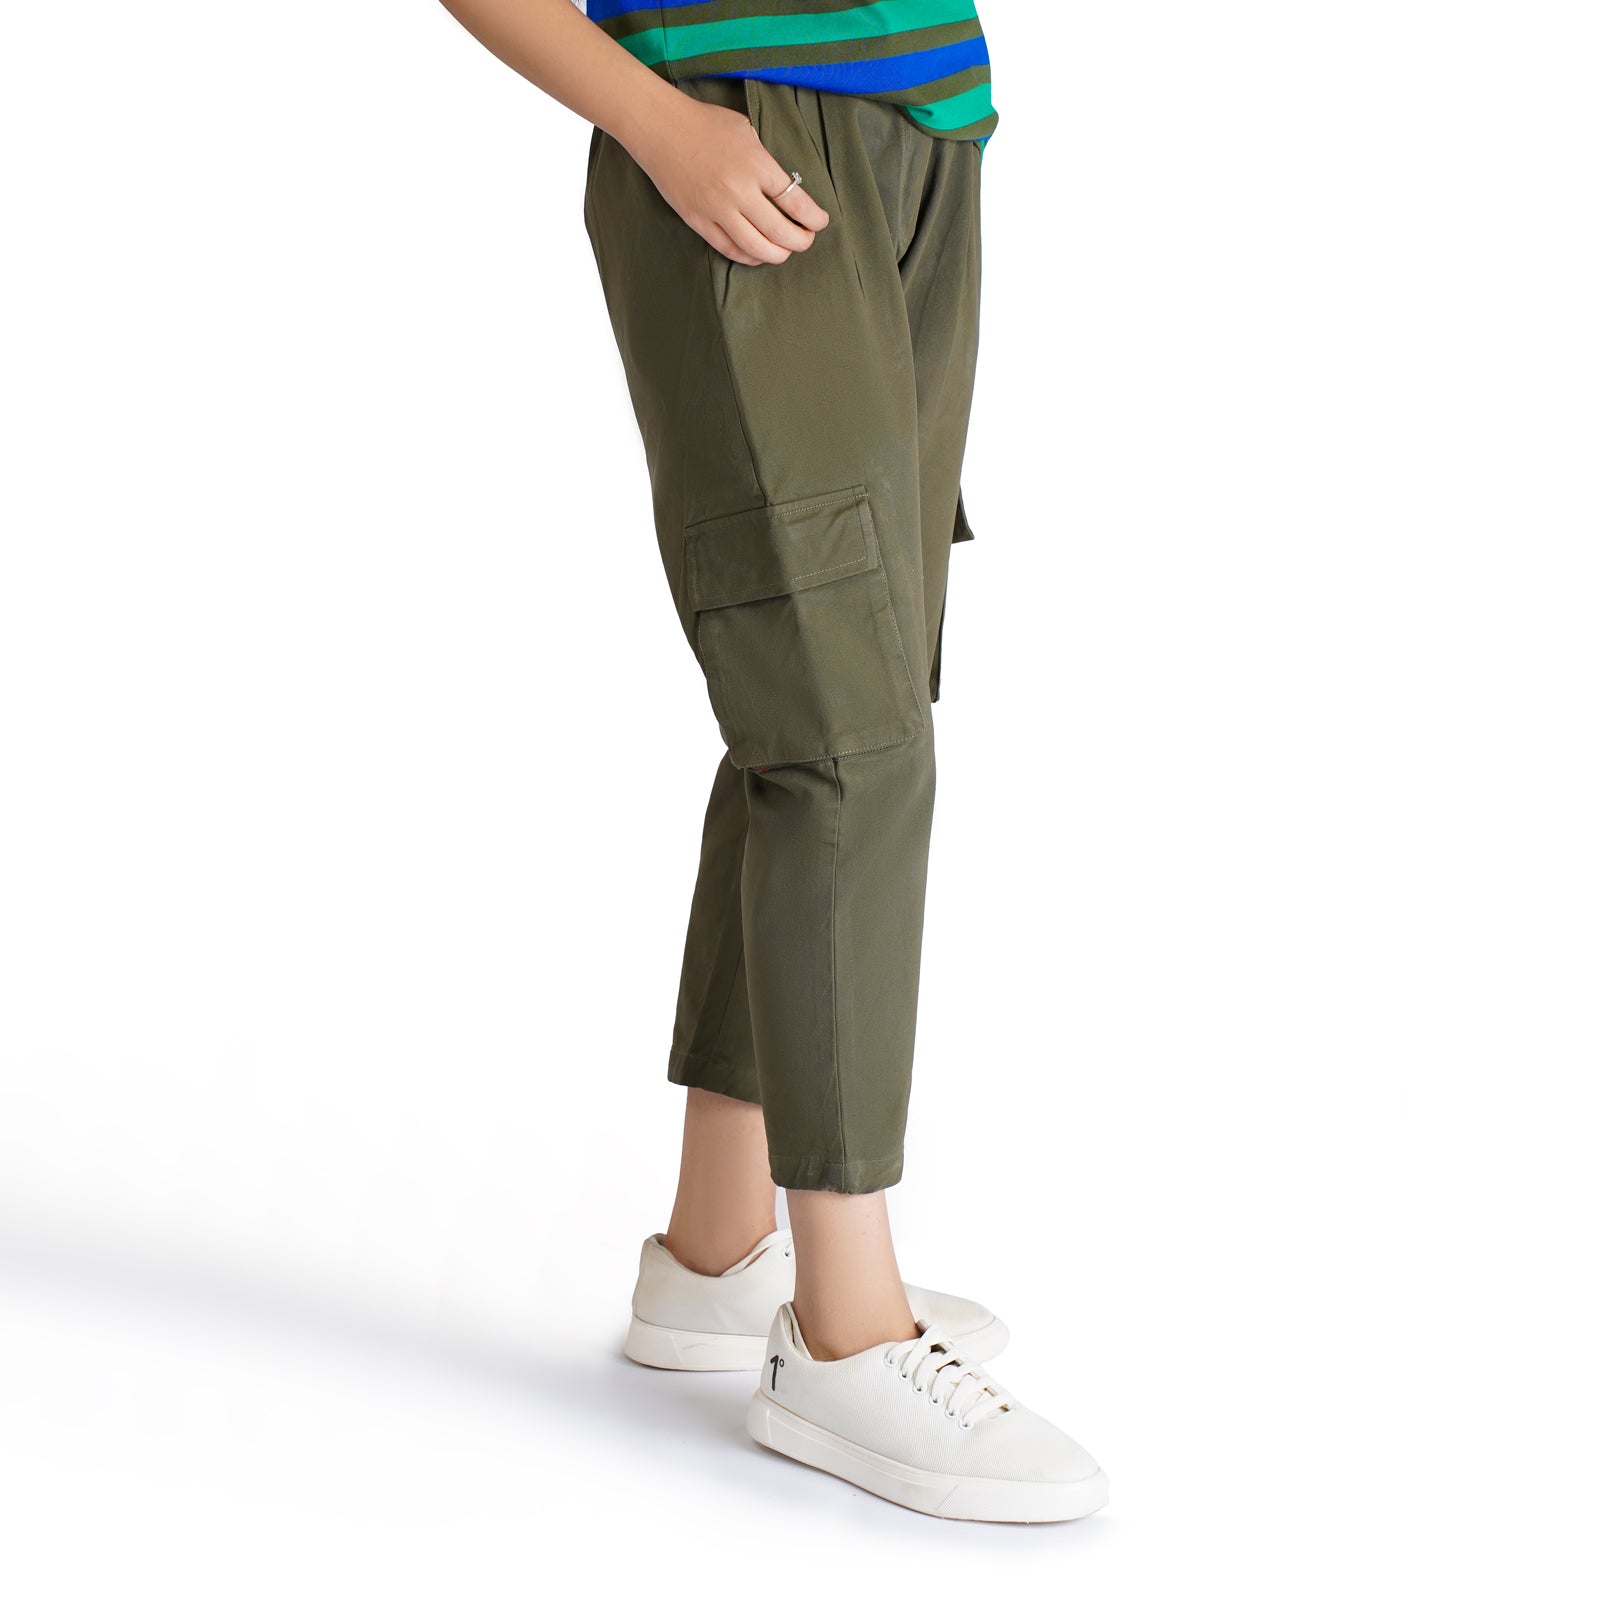 Olive Slouchy Pants - OSSW7230006